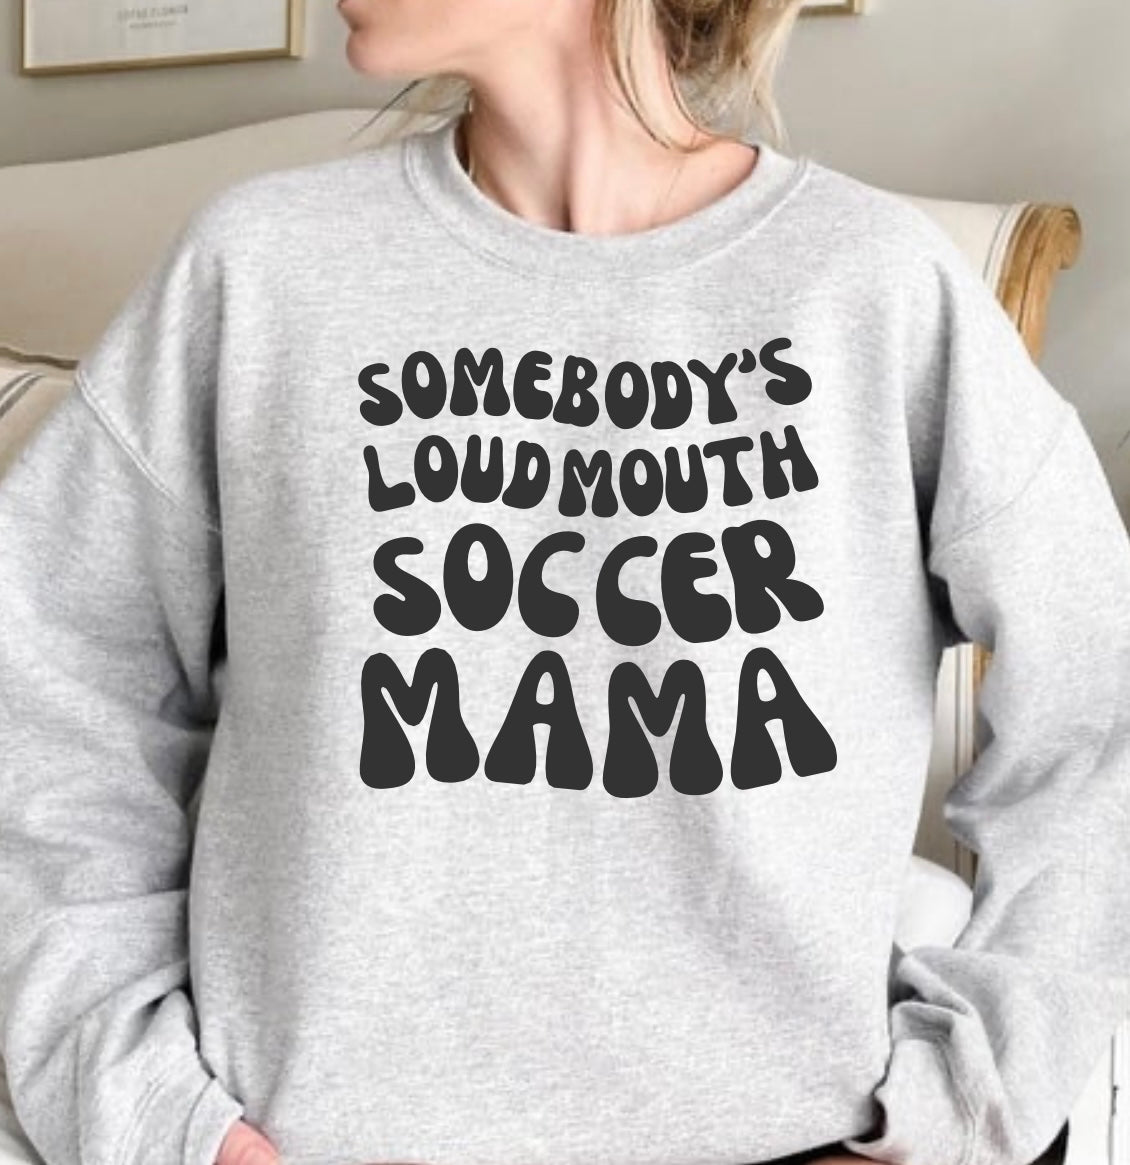 Loudmouth Soccer Mama Crew